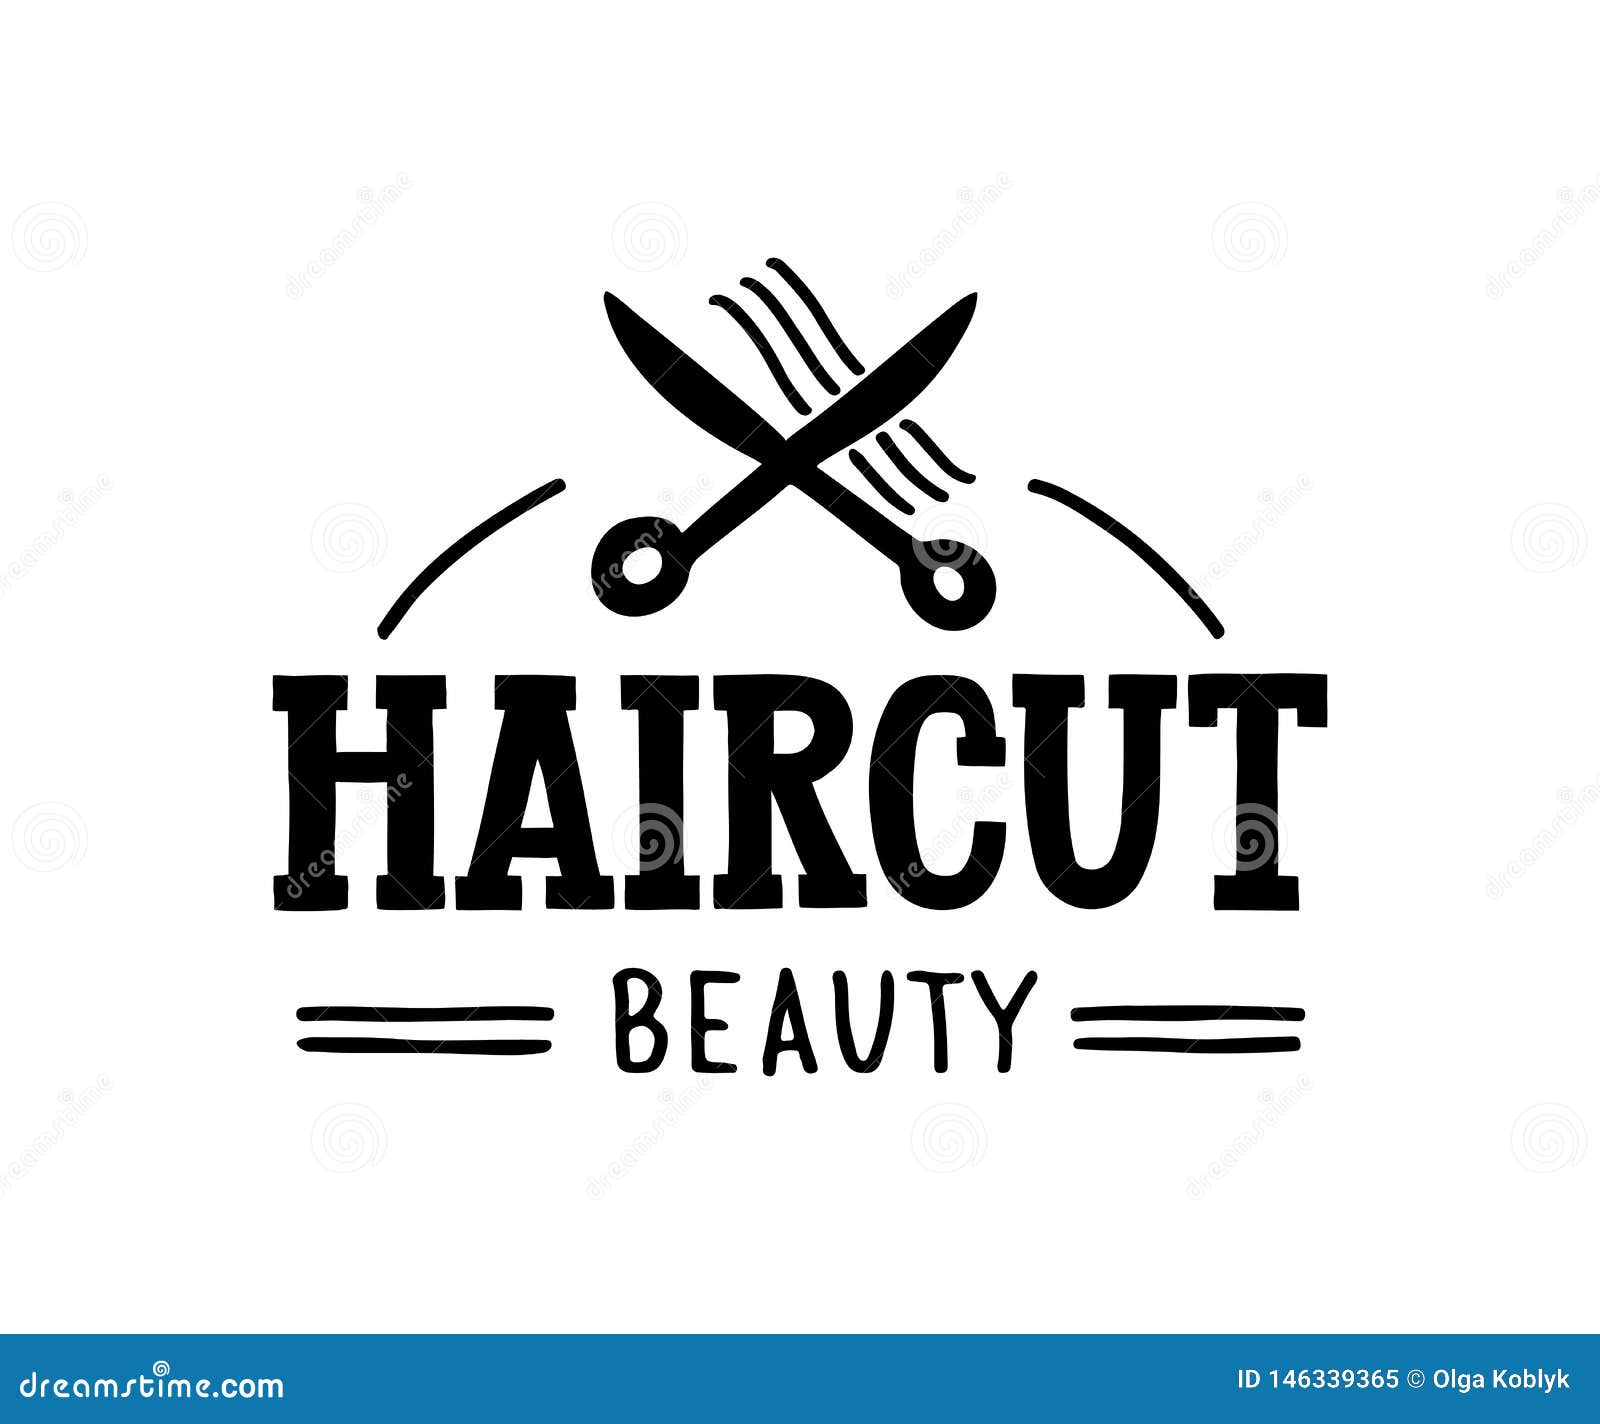 Haircut Beauty - Hand Drawn Logo for Hair and Beauty Salon with Scissors  and Hair Symbols. Stock Vector - Illustration of color, face: 146339365